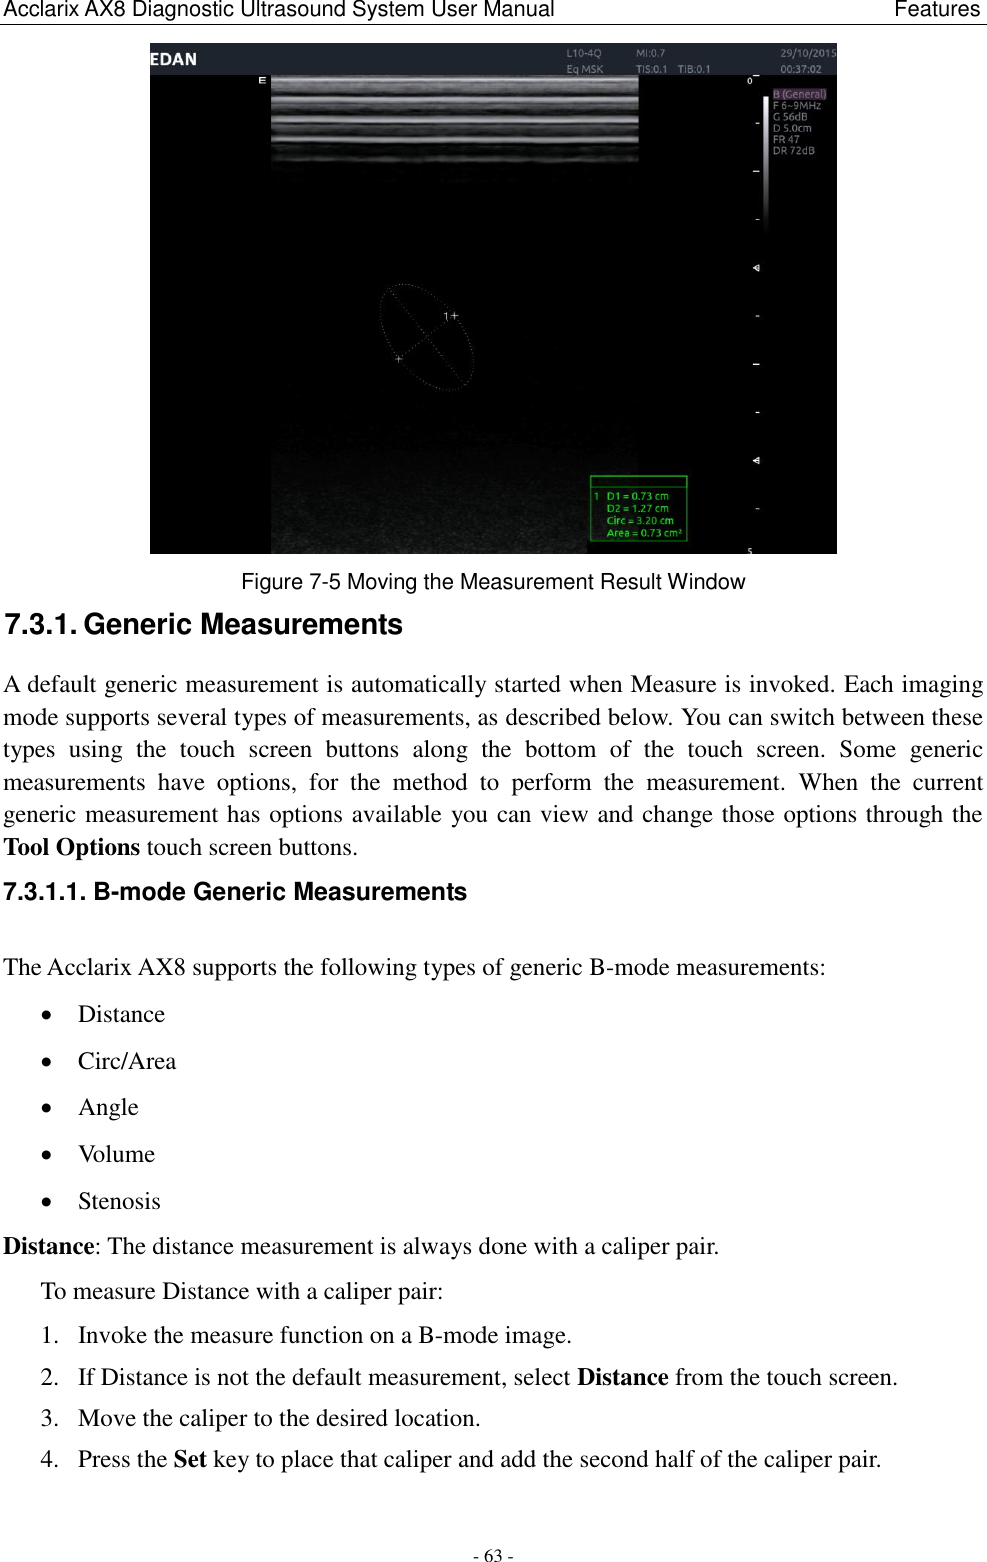 Acclarix AX8 Diagnostic Ultrasound System User Manual                                                              Features - 63 -  Figure 7-5 Moving the Measurement Result Window 7.3.1. Generic Measurements A default generic measurement is automatically started when Measure is invoked. Each imaging mode supports several types of measurements, as described below. You can switch between these types  using  the  touch  screen  buttons  along  the  bottom  of  the  touch  screen.  Some  generic measurements  have  options,  for  the  method  to  perform  the  measurement.  When  the  current generic measurement has options available you can view and change those options through the Tool Options touch screen buttons. 7.3.1.1. B-mode Generic Measurements The Acclarix AX8 supports the following types of generic B-mode measurements:  Distance  Circ/Area  Angle  Volume  Stenosis Distance: The distance measurement is always done with a caliper pair. To measure Distance with a caliper pair: 1. Invoke the measure function on a B-mode image. 2. If Distance is not the default measurement, select Distance from the touch screen. 3. Move the caliper to the desired location. 4. Press the Set key to place that caliper and add the second half of the caliper pair.  